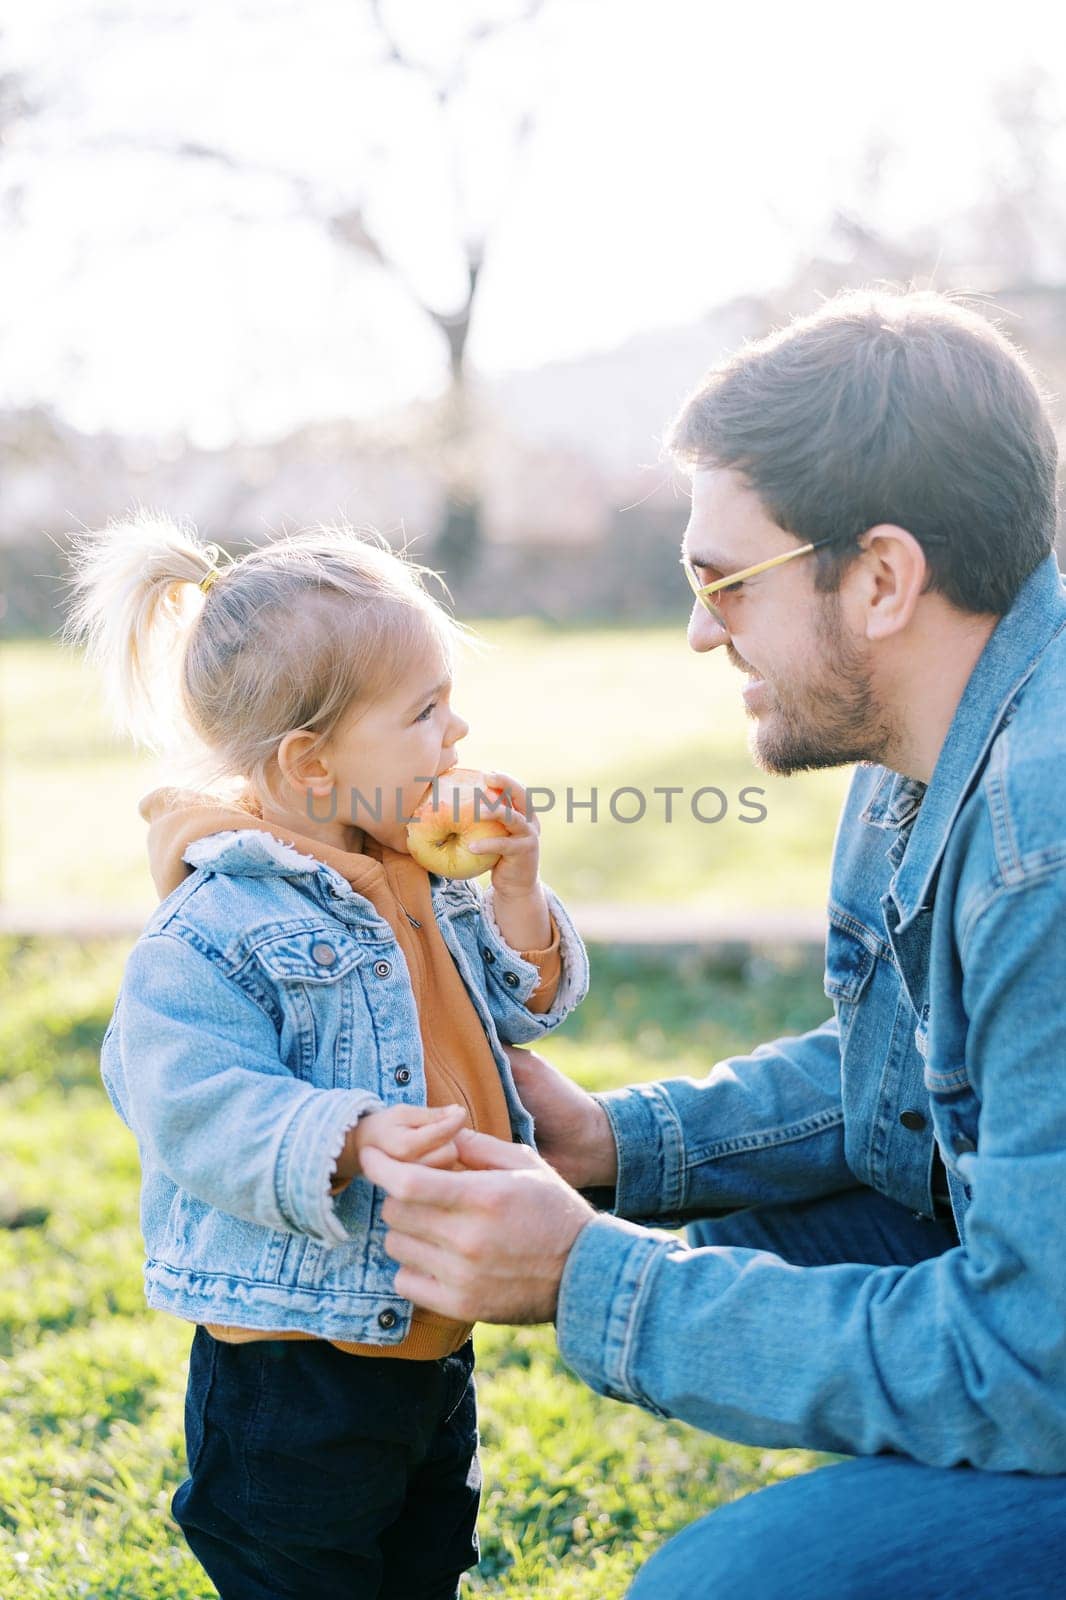 Smiling dad squatted opposite to a little girl eating an apple on a green meadow by Nadtochiy